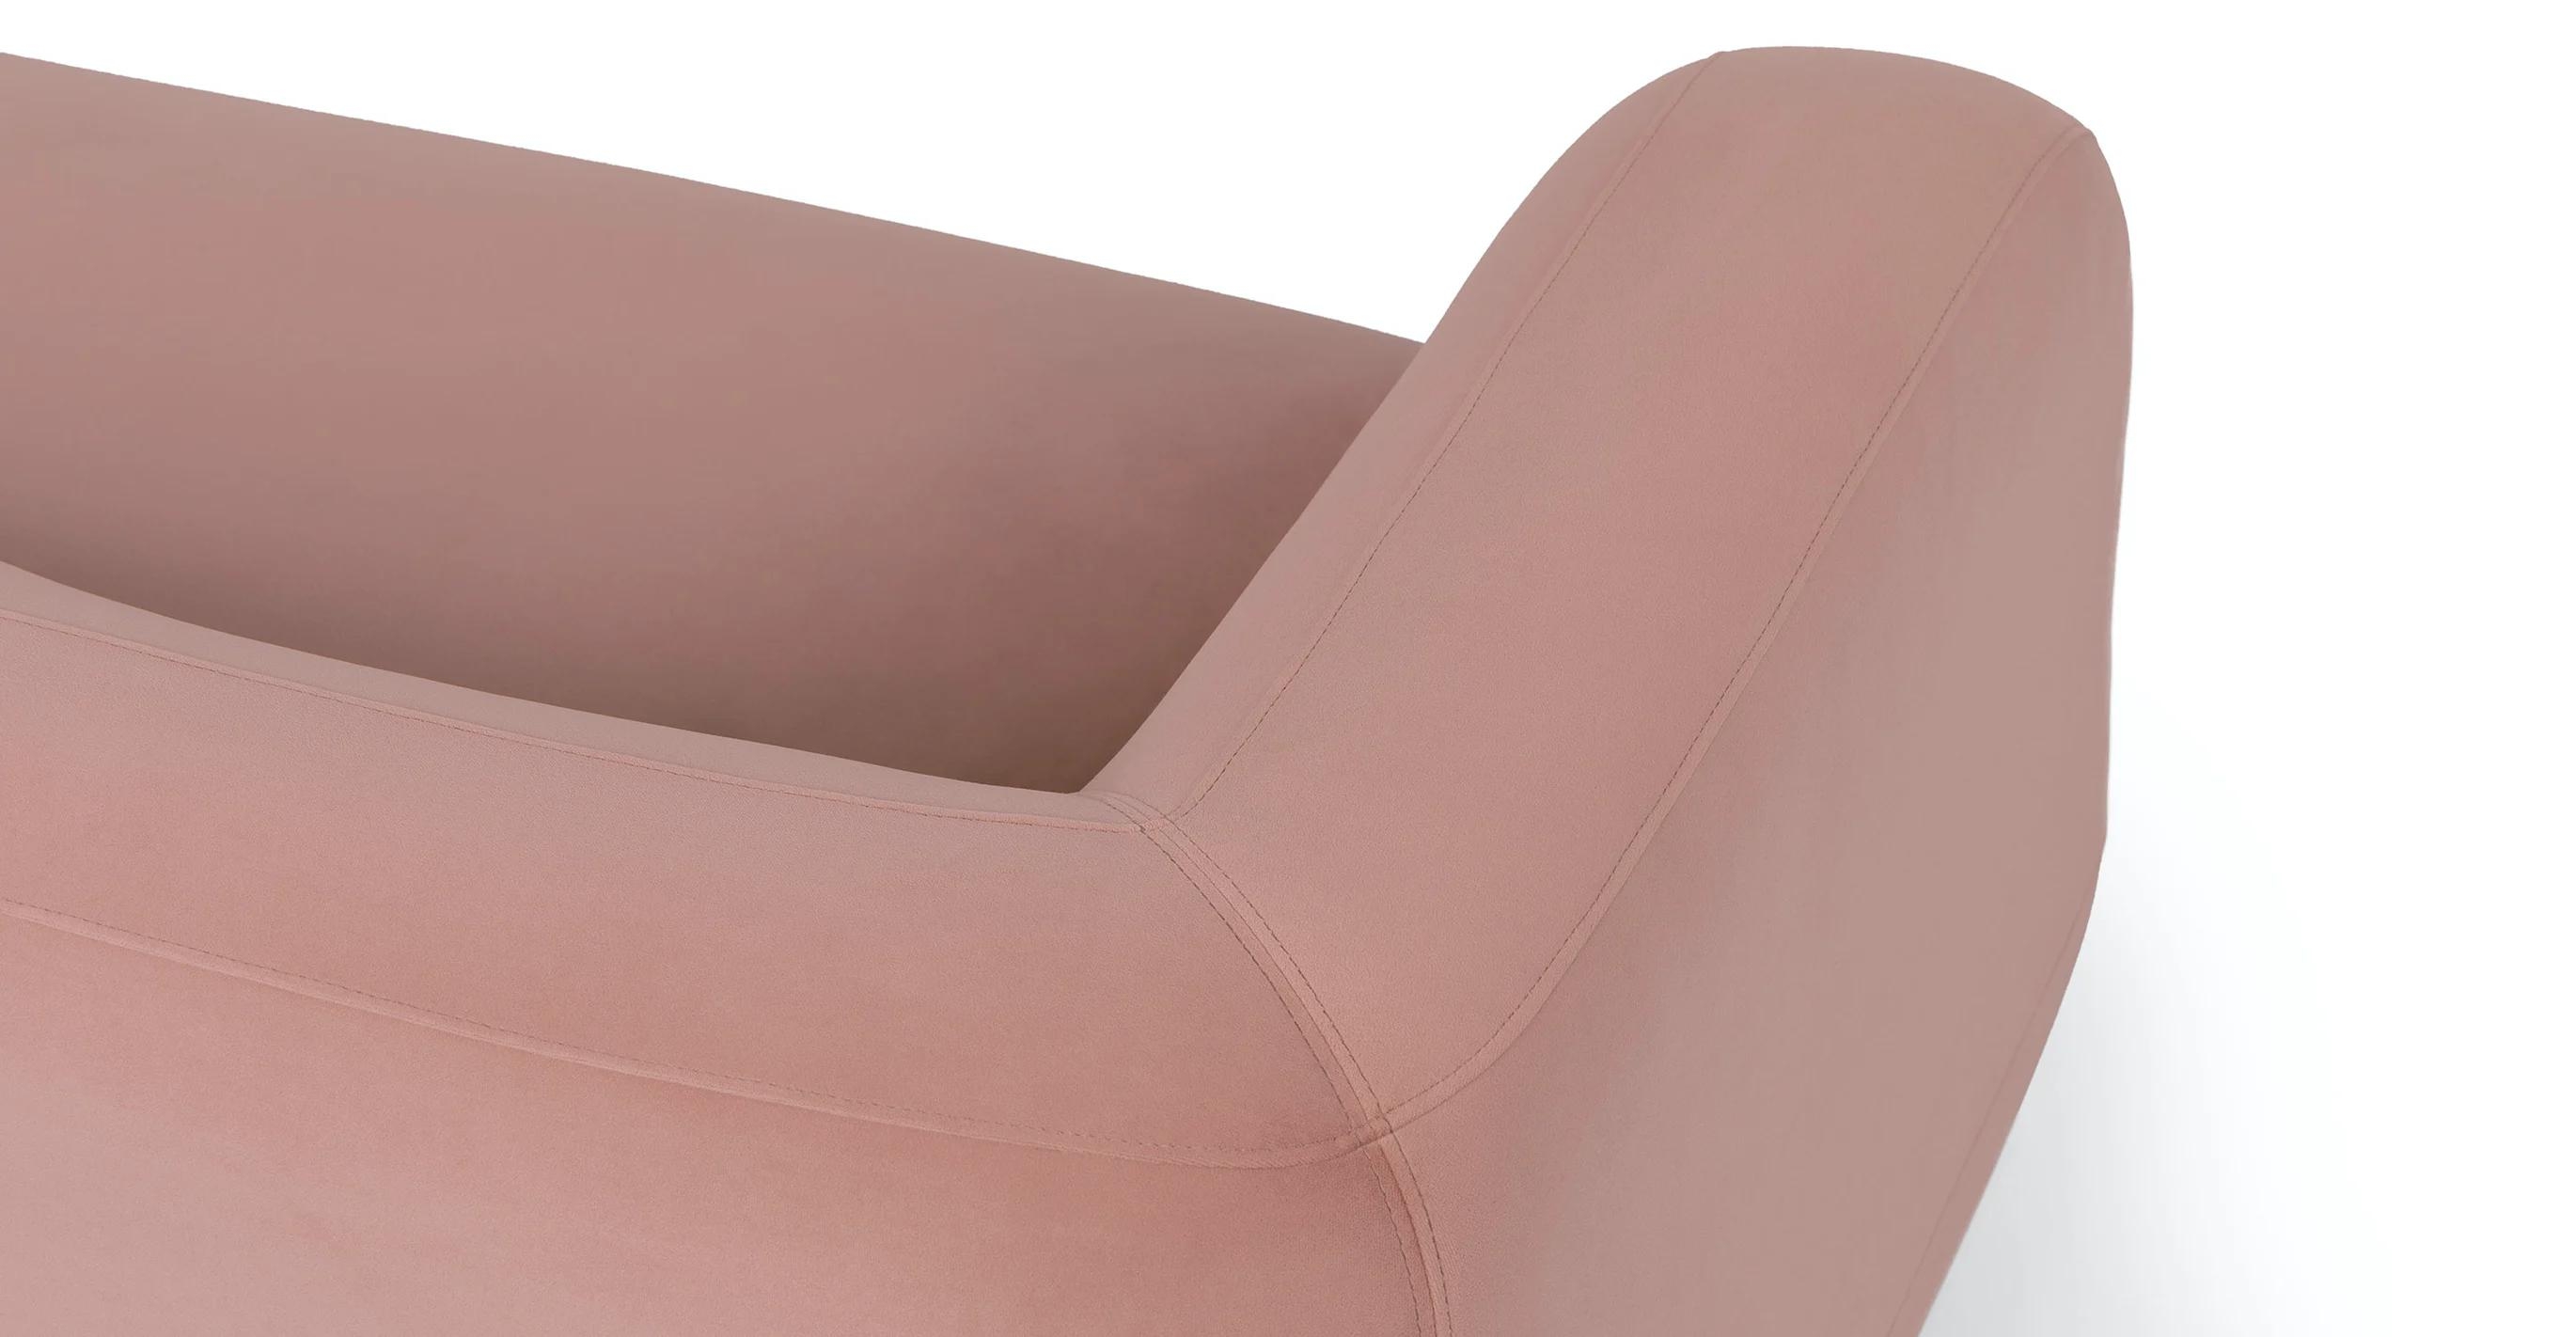 Lupra Daybed, Hibiscus Pink - Image 7